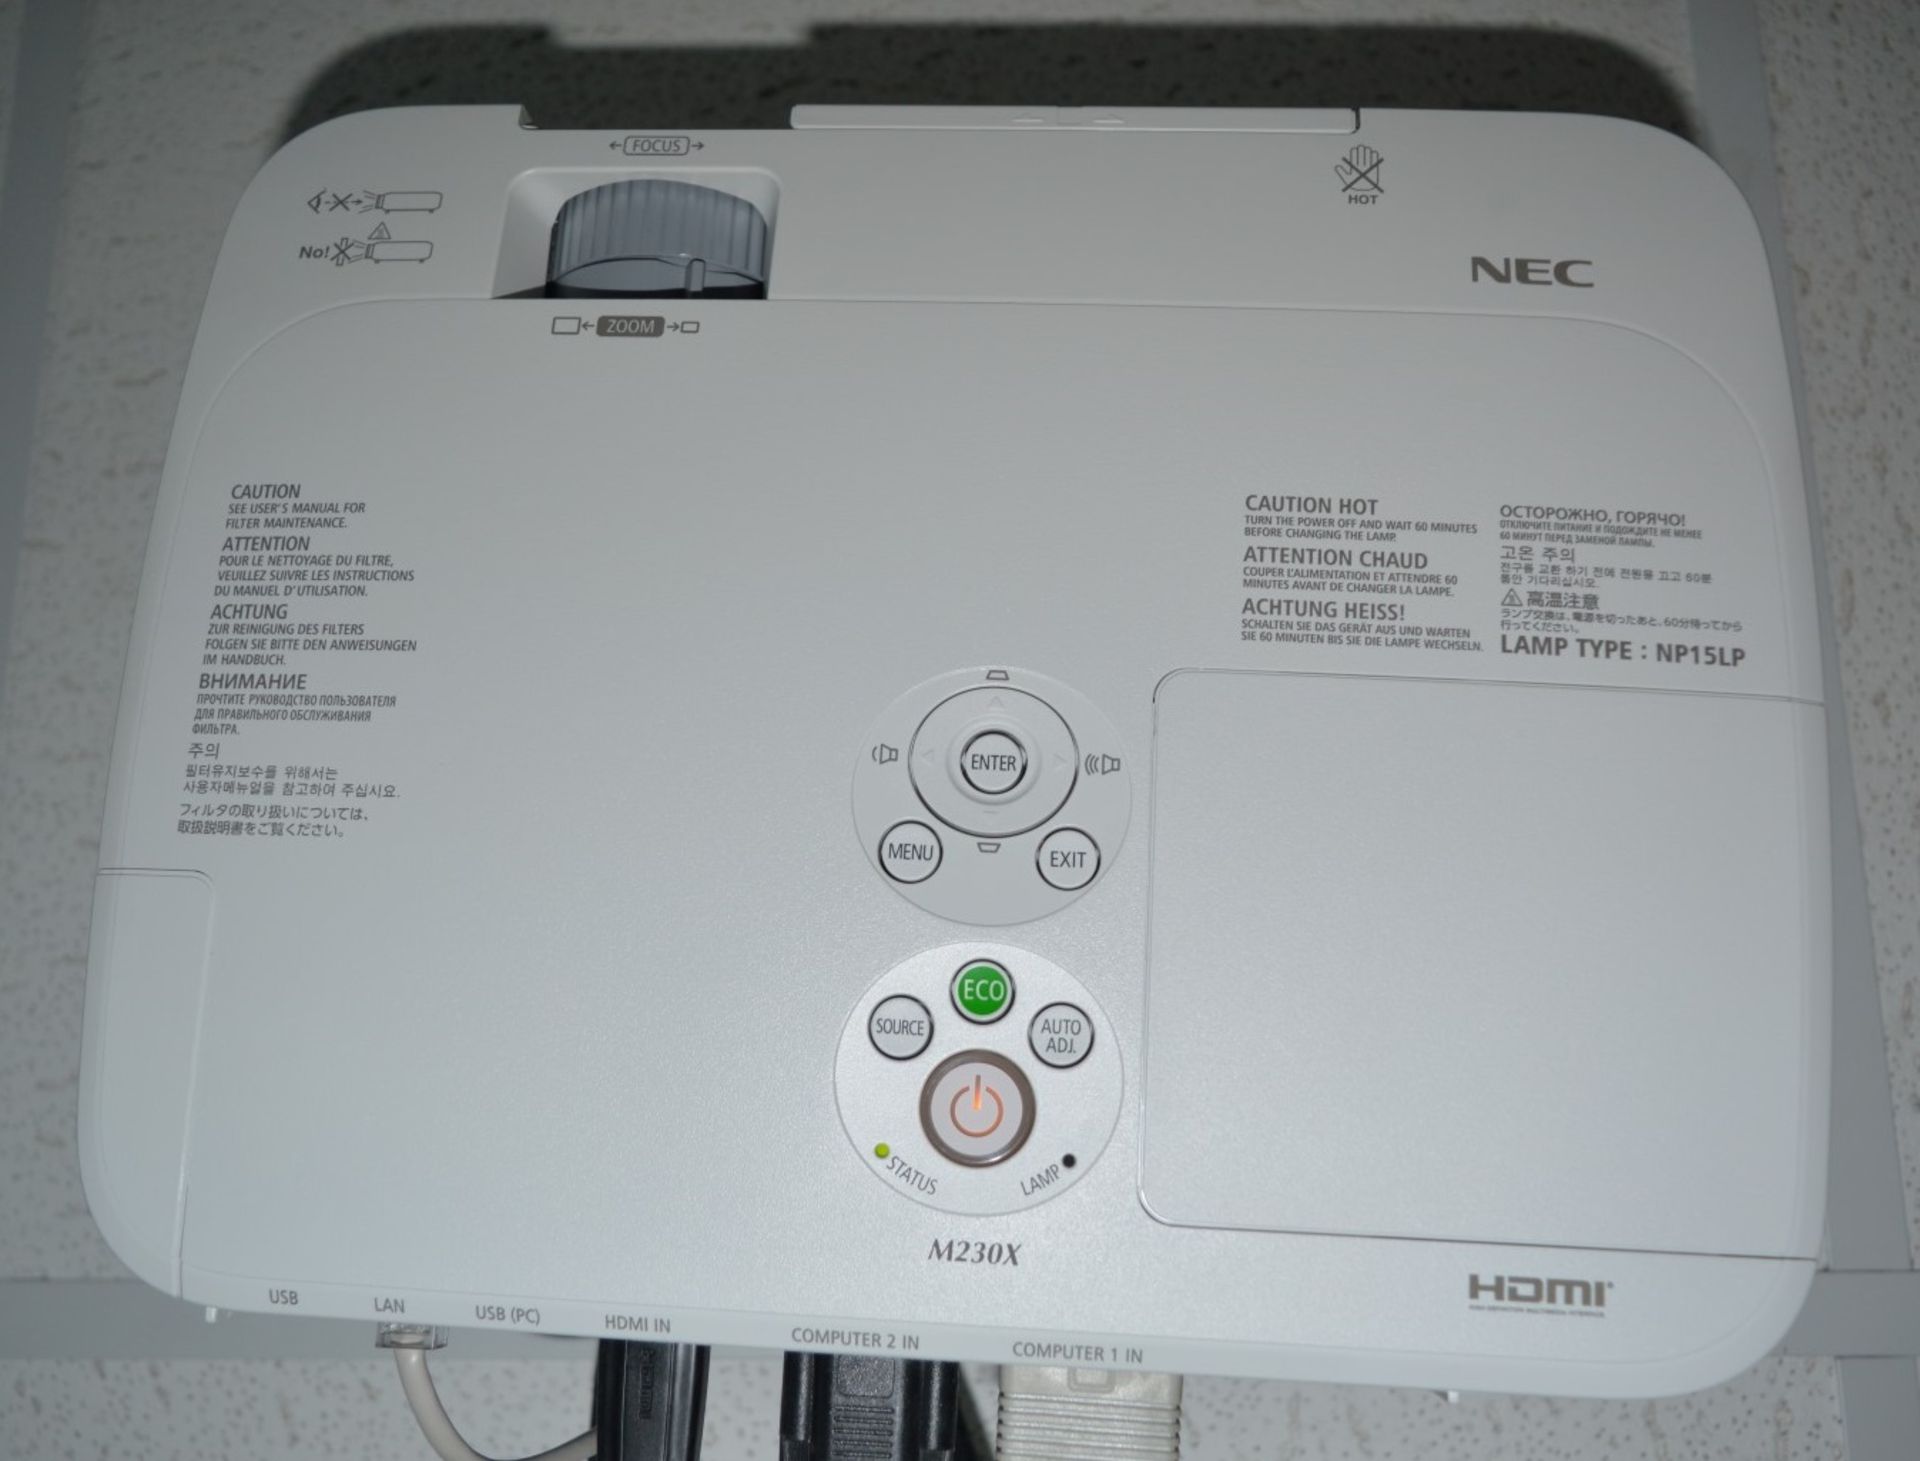 1 x NEC NP-M239X Projector With Ceiling Bracket and Remote Control - 2300 Lumens, HDMI, Full HD - Image 3 of 4